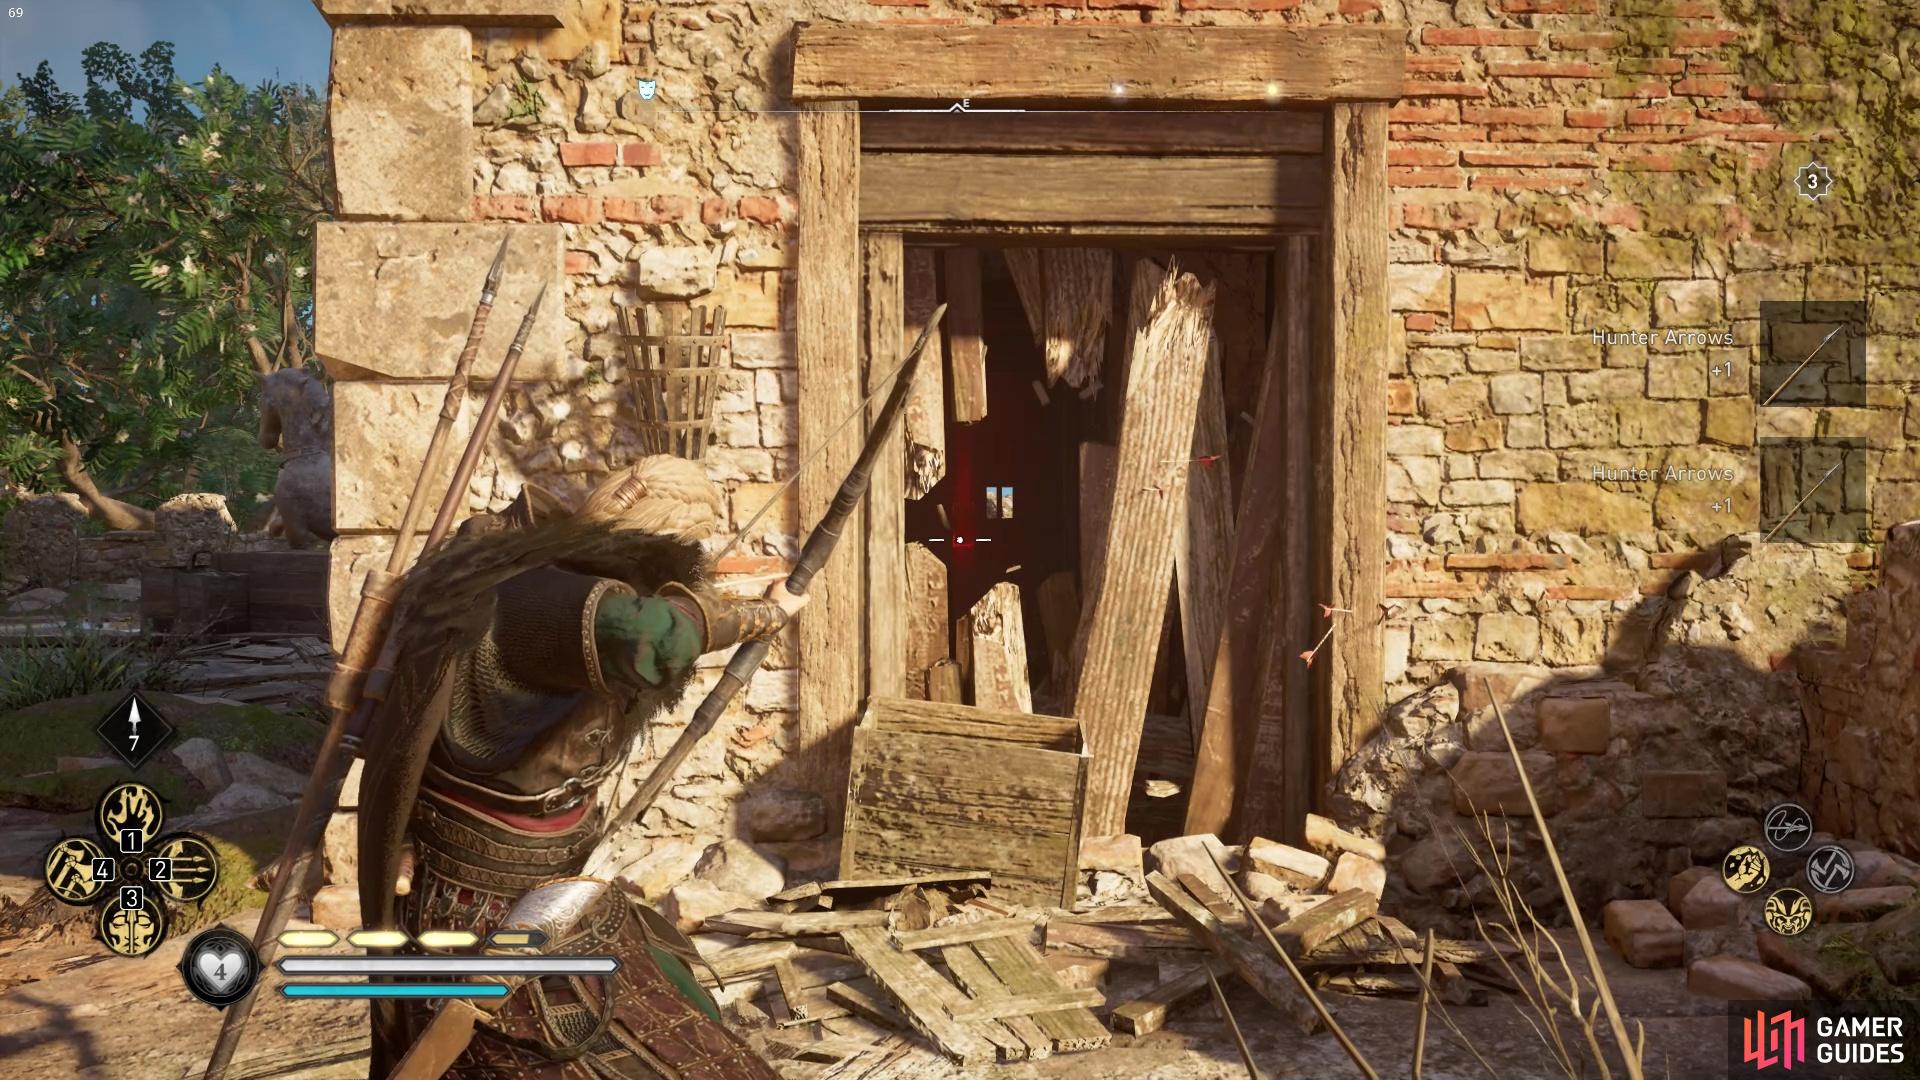 youll need to shoot the lock through the hole in the wall to gain access.